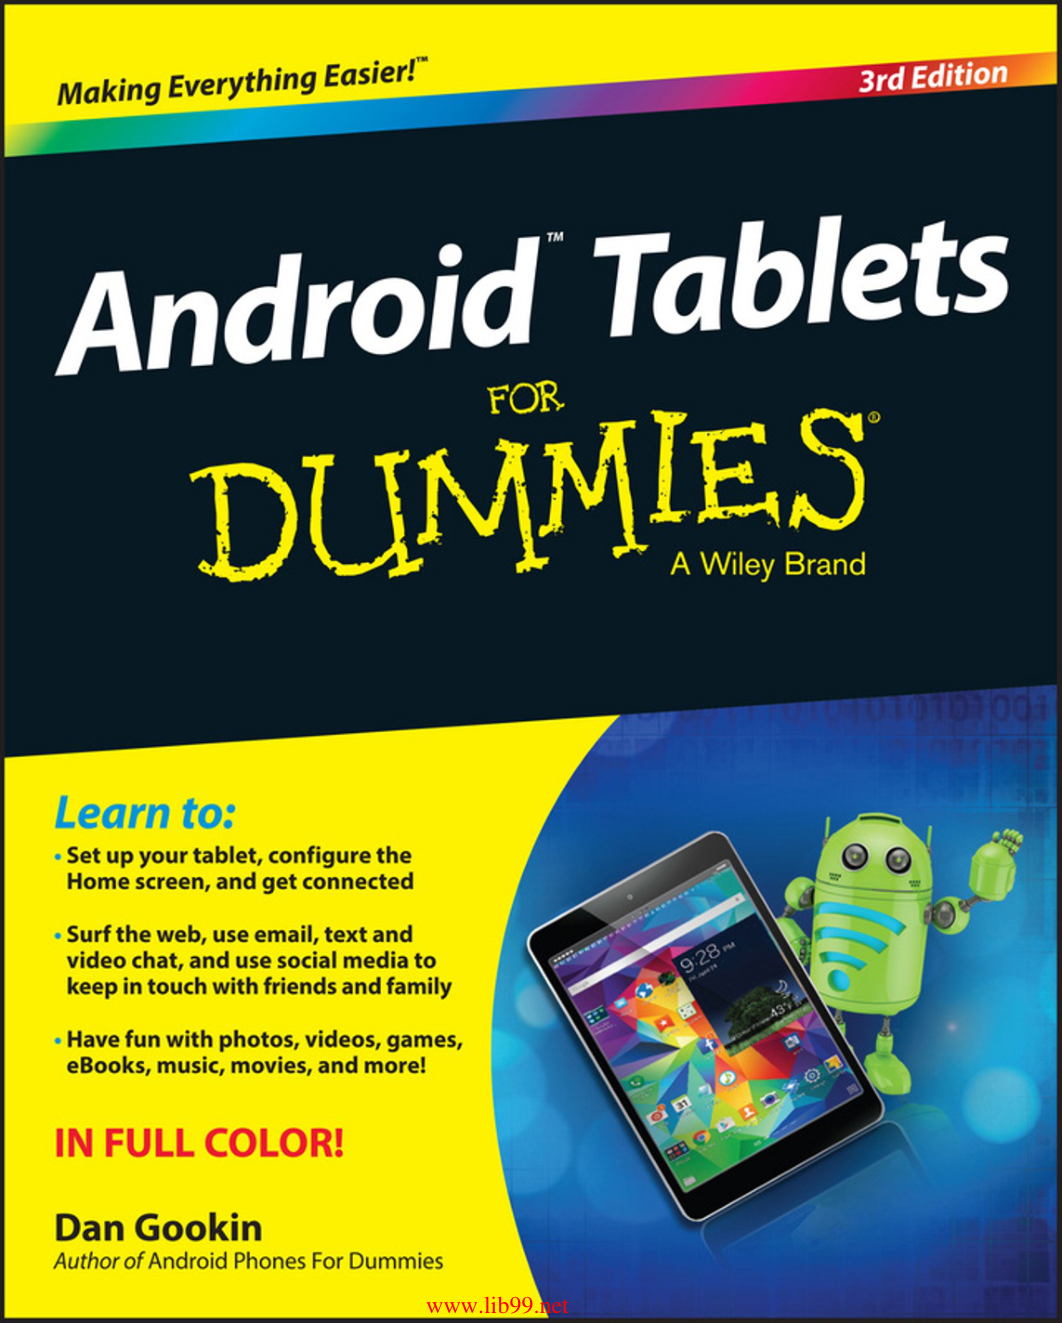 Android Tablets For Dummies, 3rd Edition.png